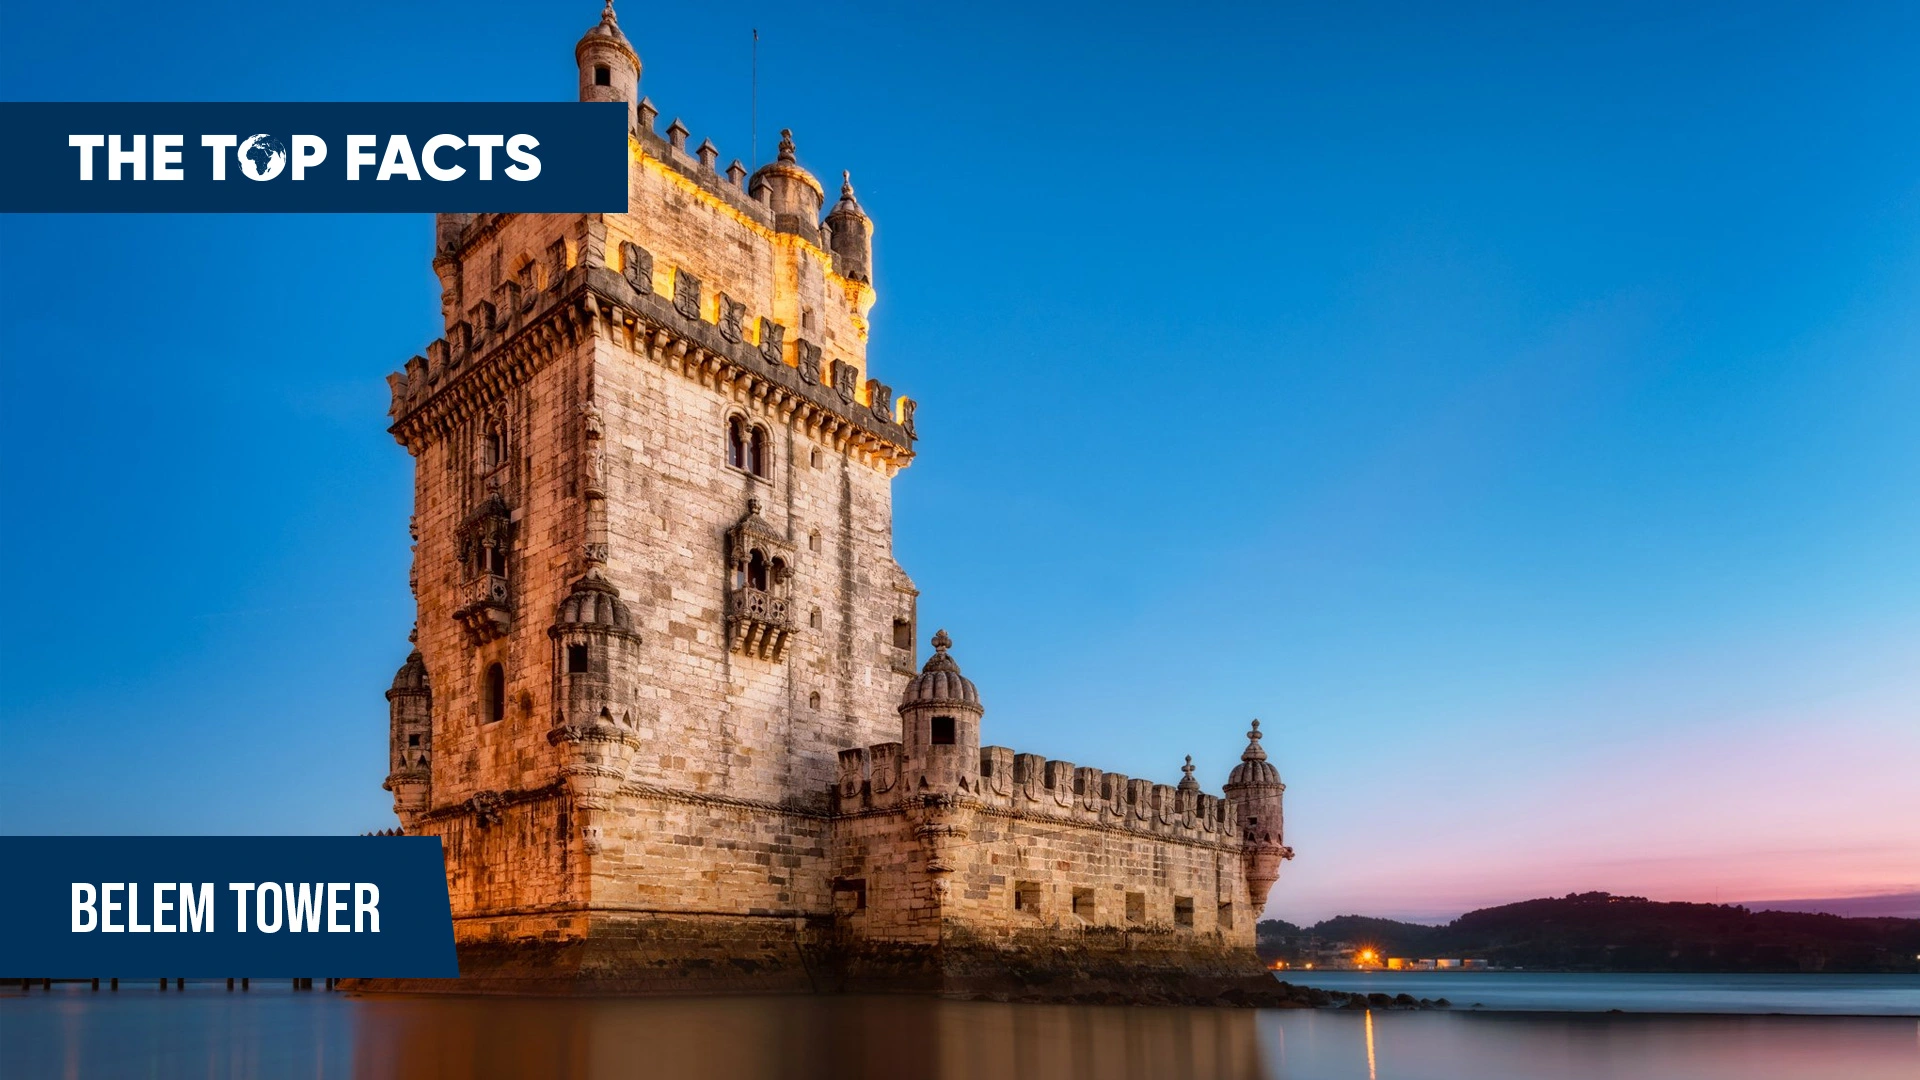 Historic Tower of Belem